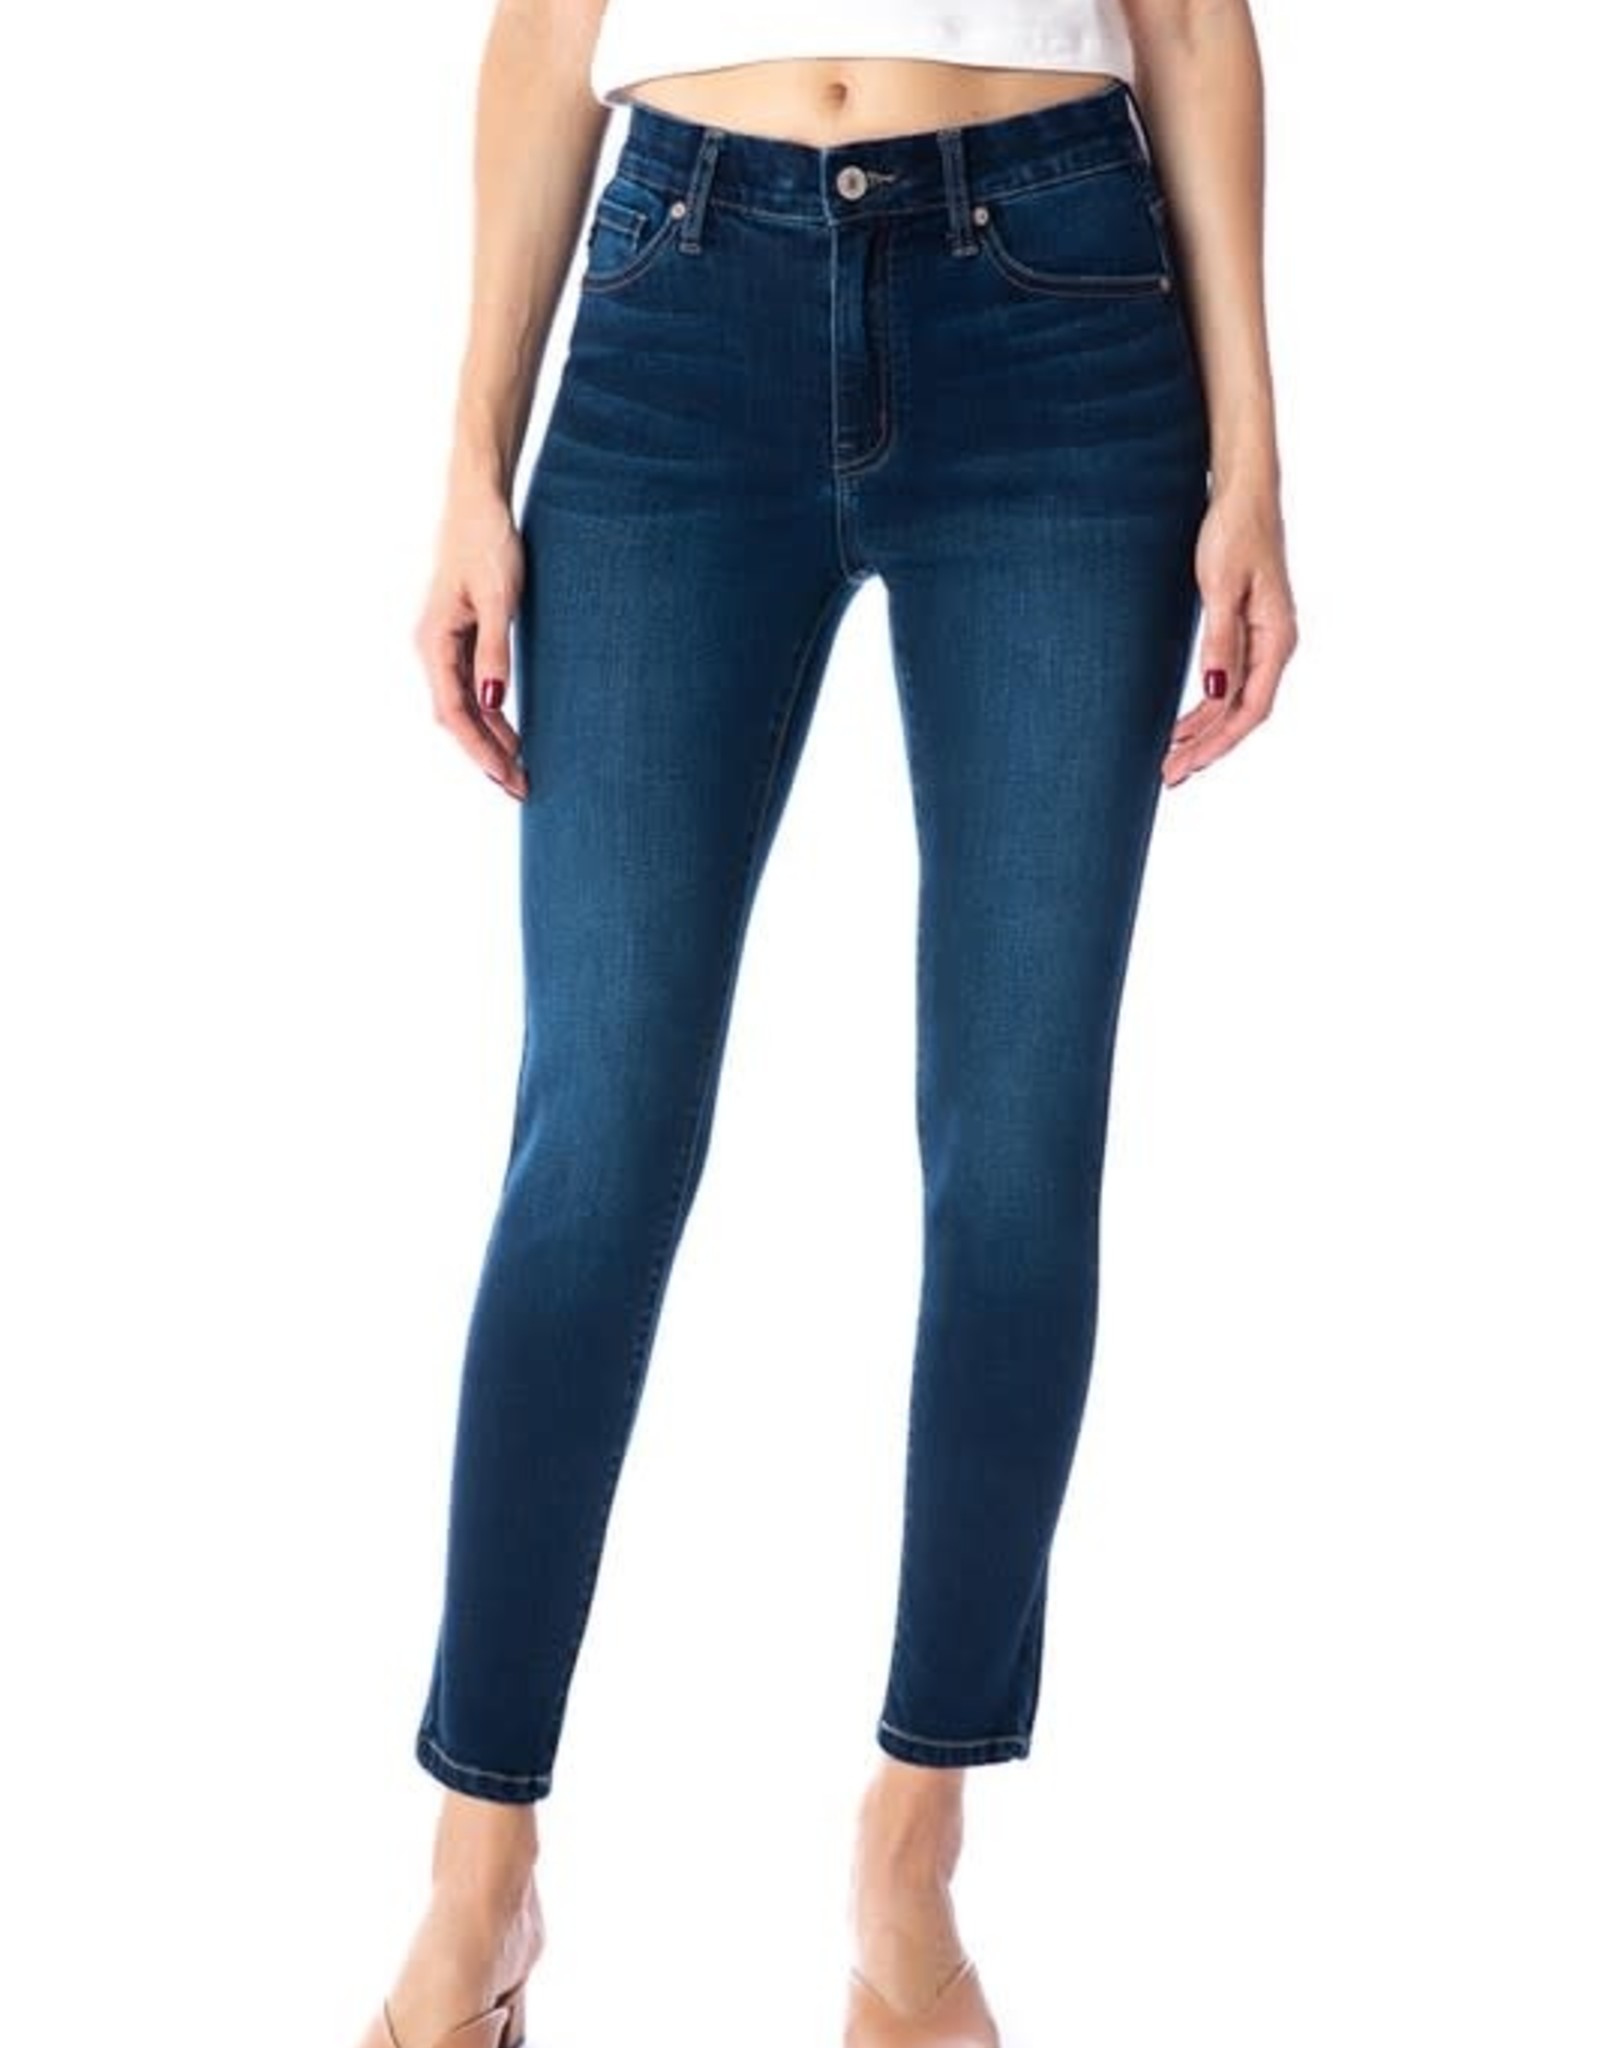 Kan Can USA High Rise Basic Ankle Skinny Jeans - KC7312D